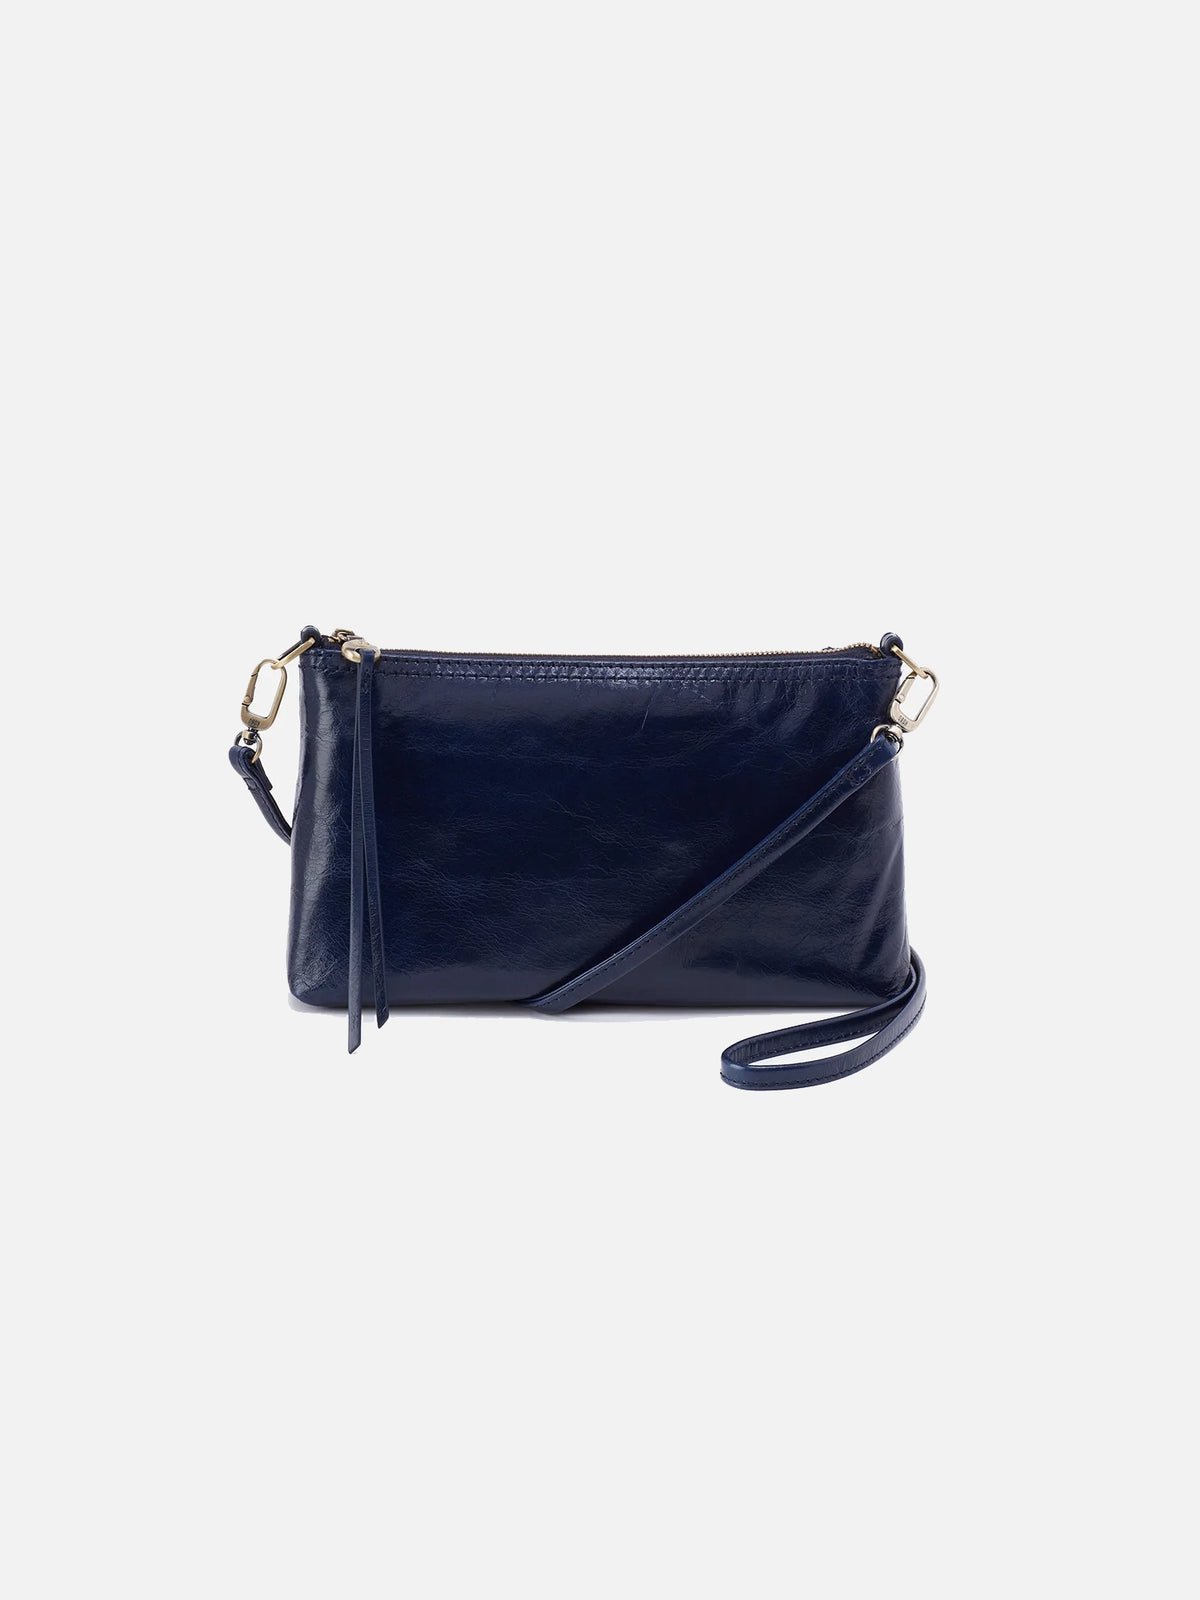 hobo darcy convertible 3-way crossbody bag in navy blue nightshade polished leather